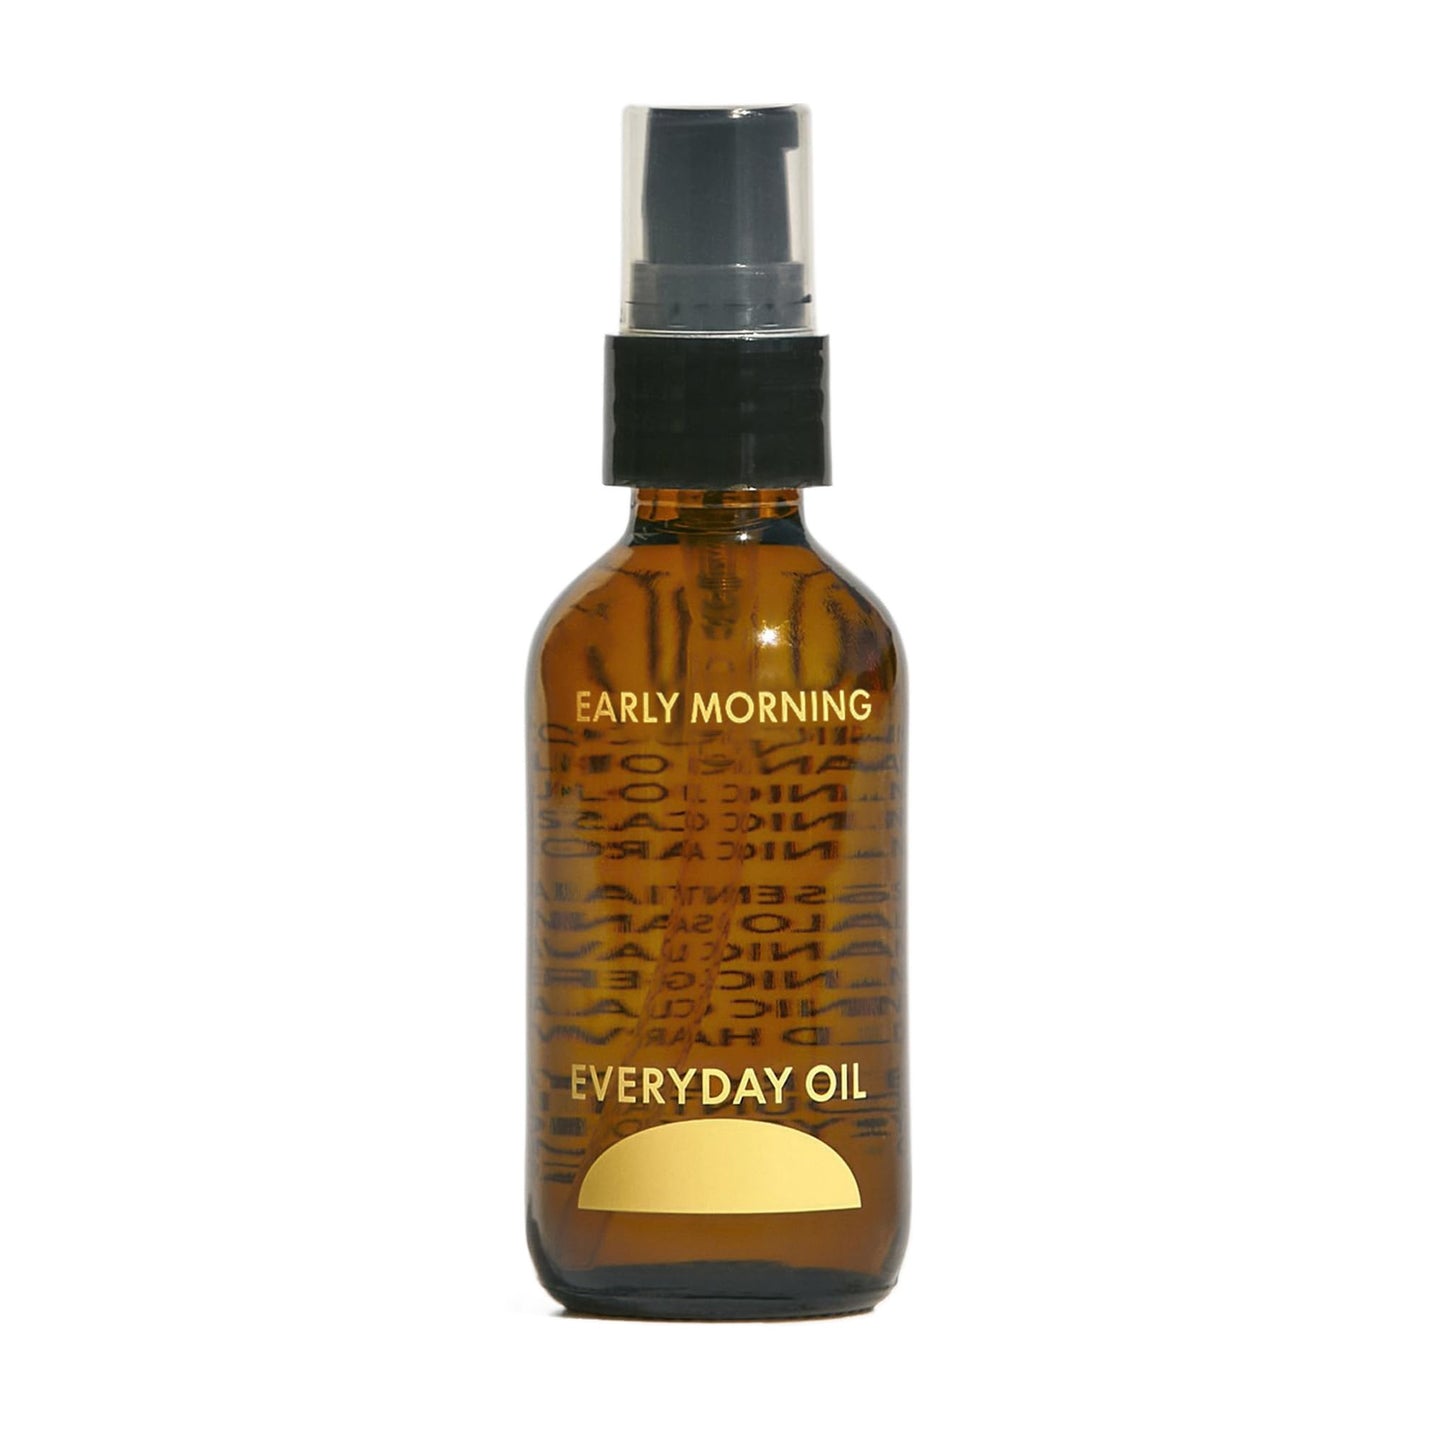 Everyday Oil, early morning (2oz)